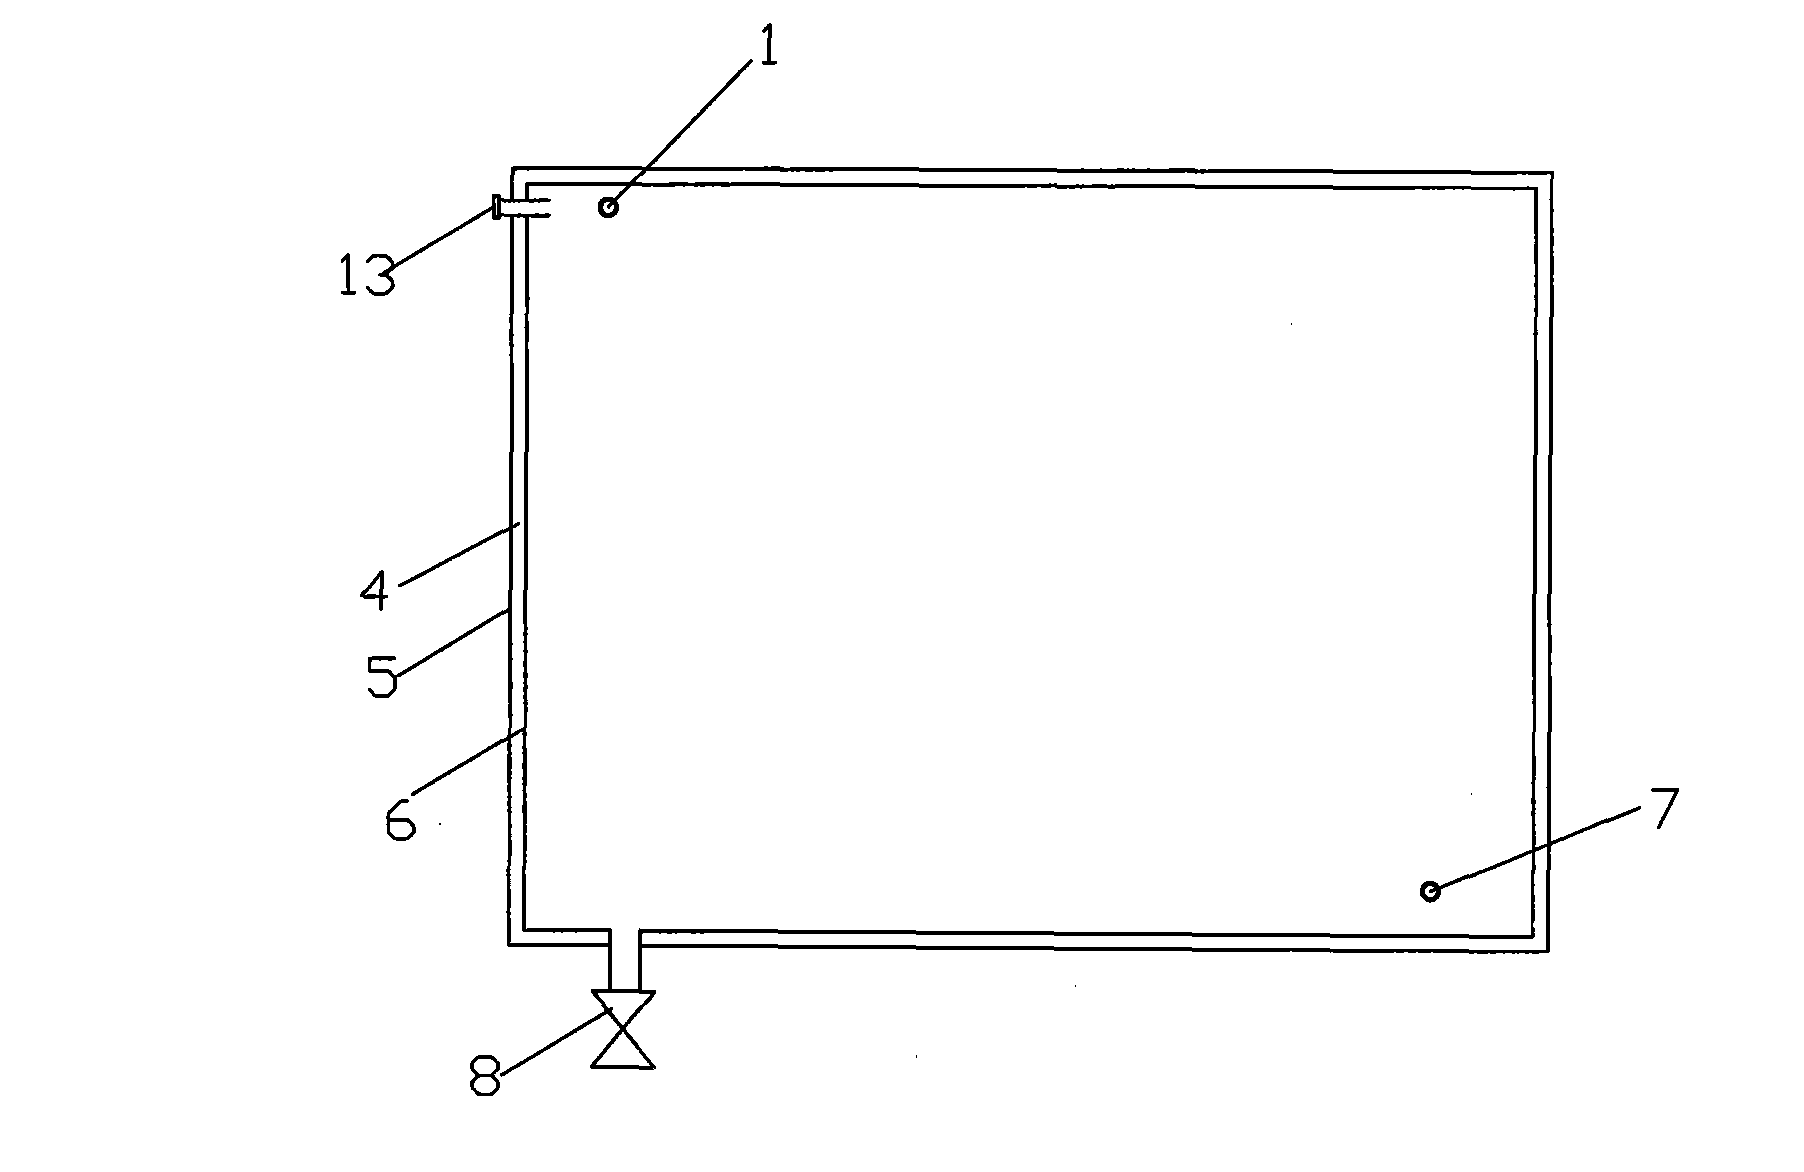 Energy storing device